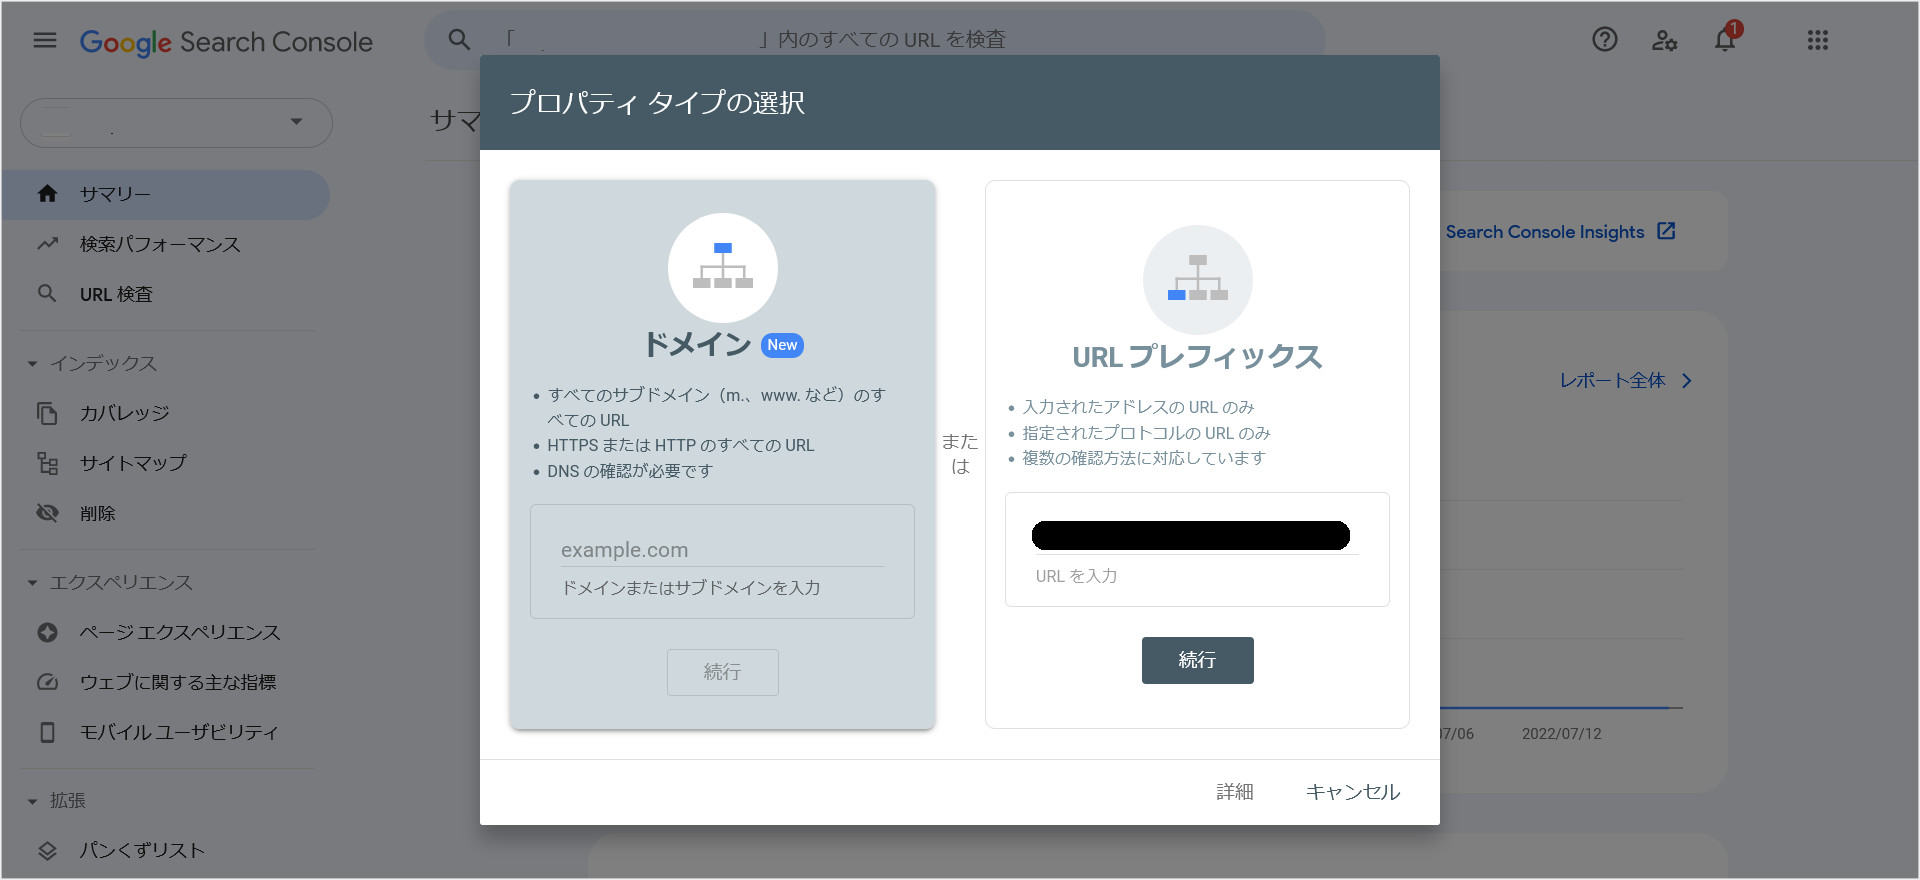 Search Consoleのプロパティ追加画面